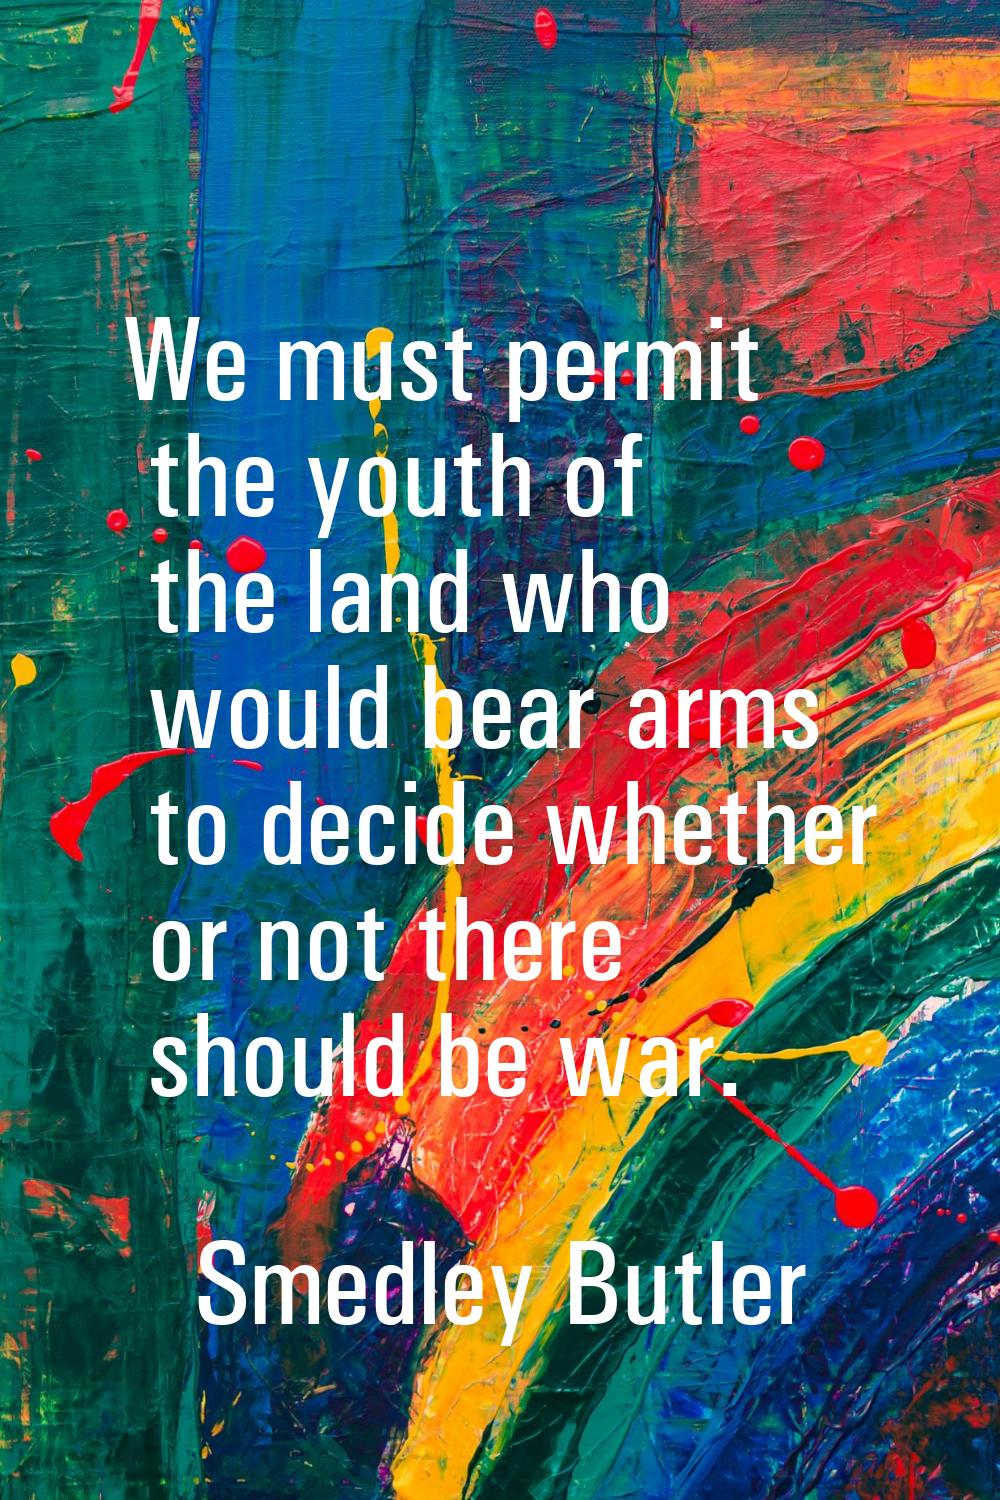 We must permit the youth of the land who would bear arms to decide whether or not there should be w